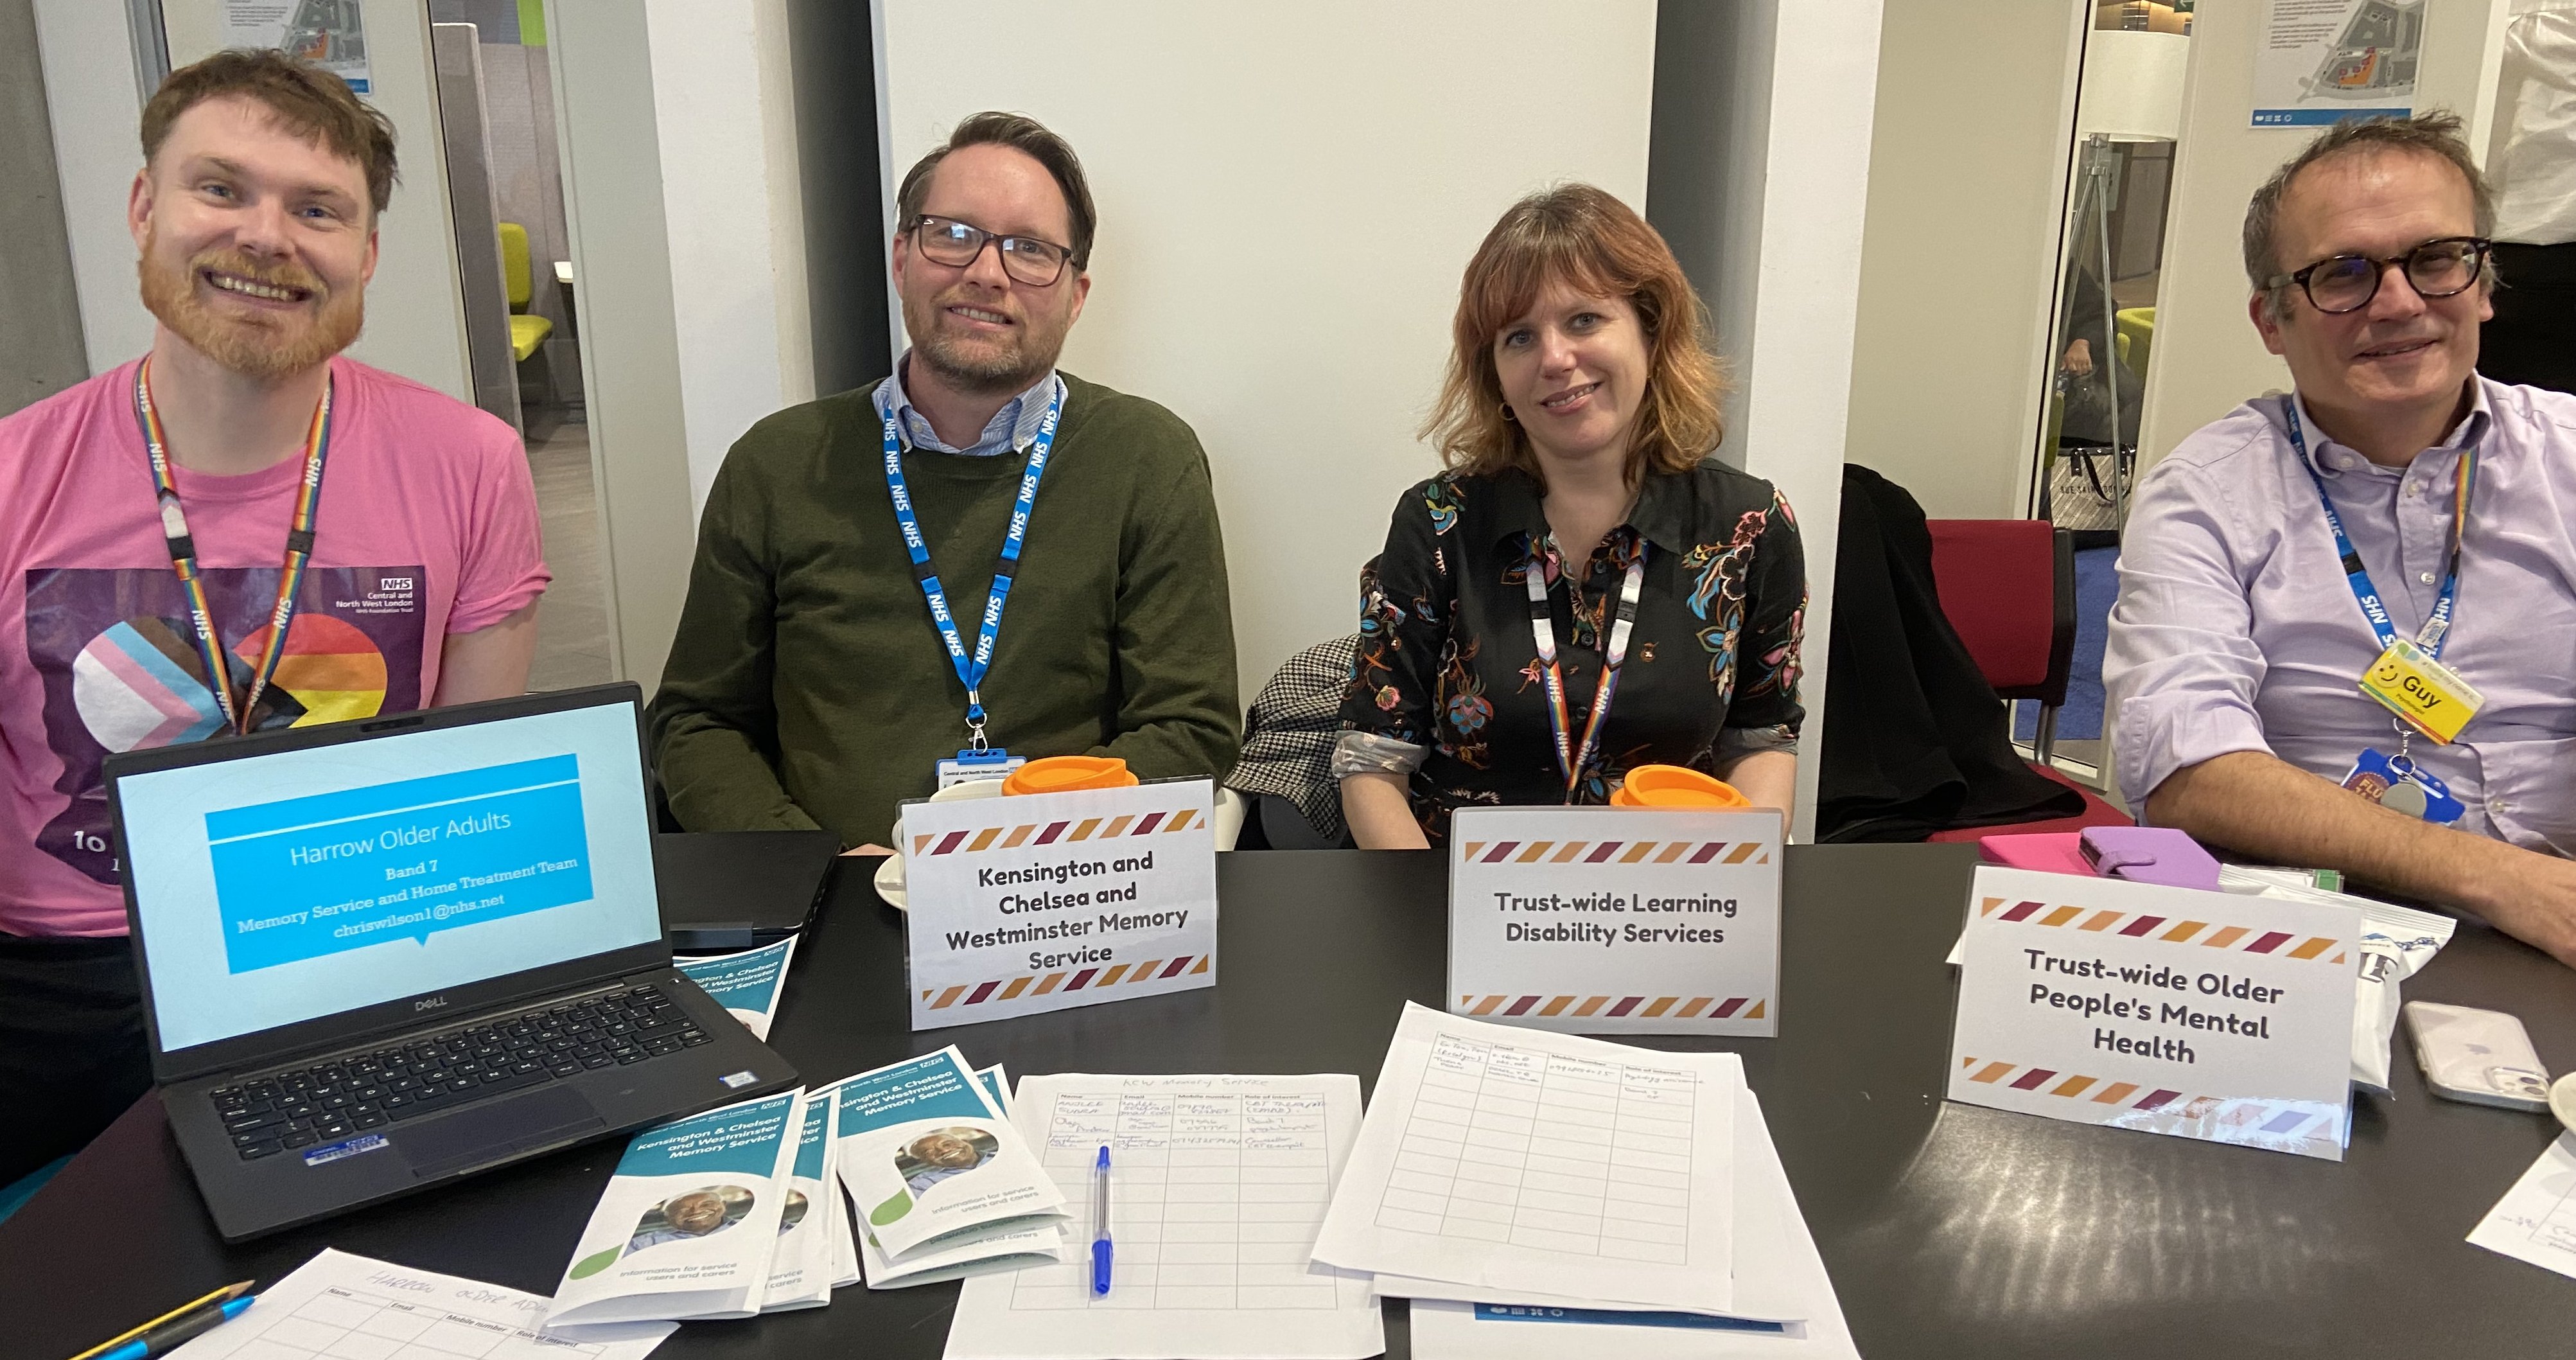 Luke O'Connor (Westminster OPHA Memory Service), Dr Chris Wilson (Harrow Psychology), Guy Harman (Hillingdon Psychology Community Health) and Dr Sarah Blainey (Autism Specialist and LD Lead)  